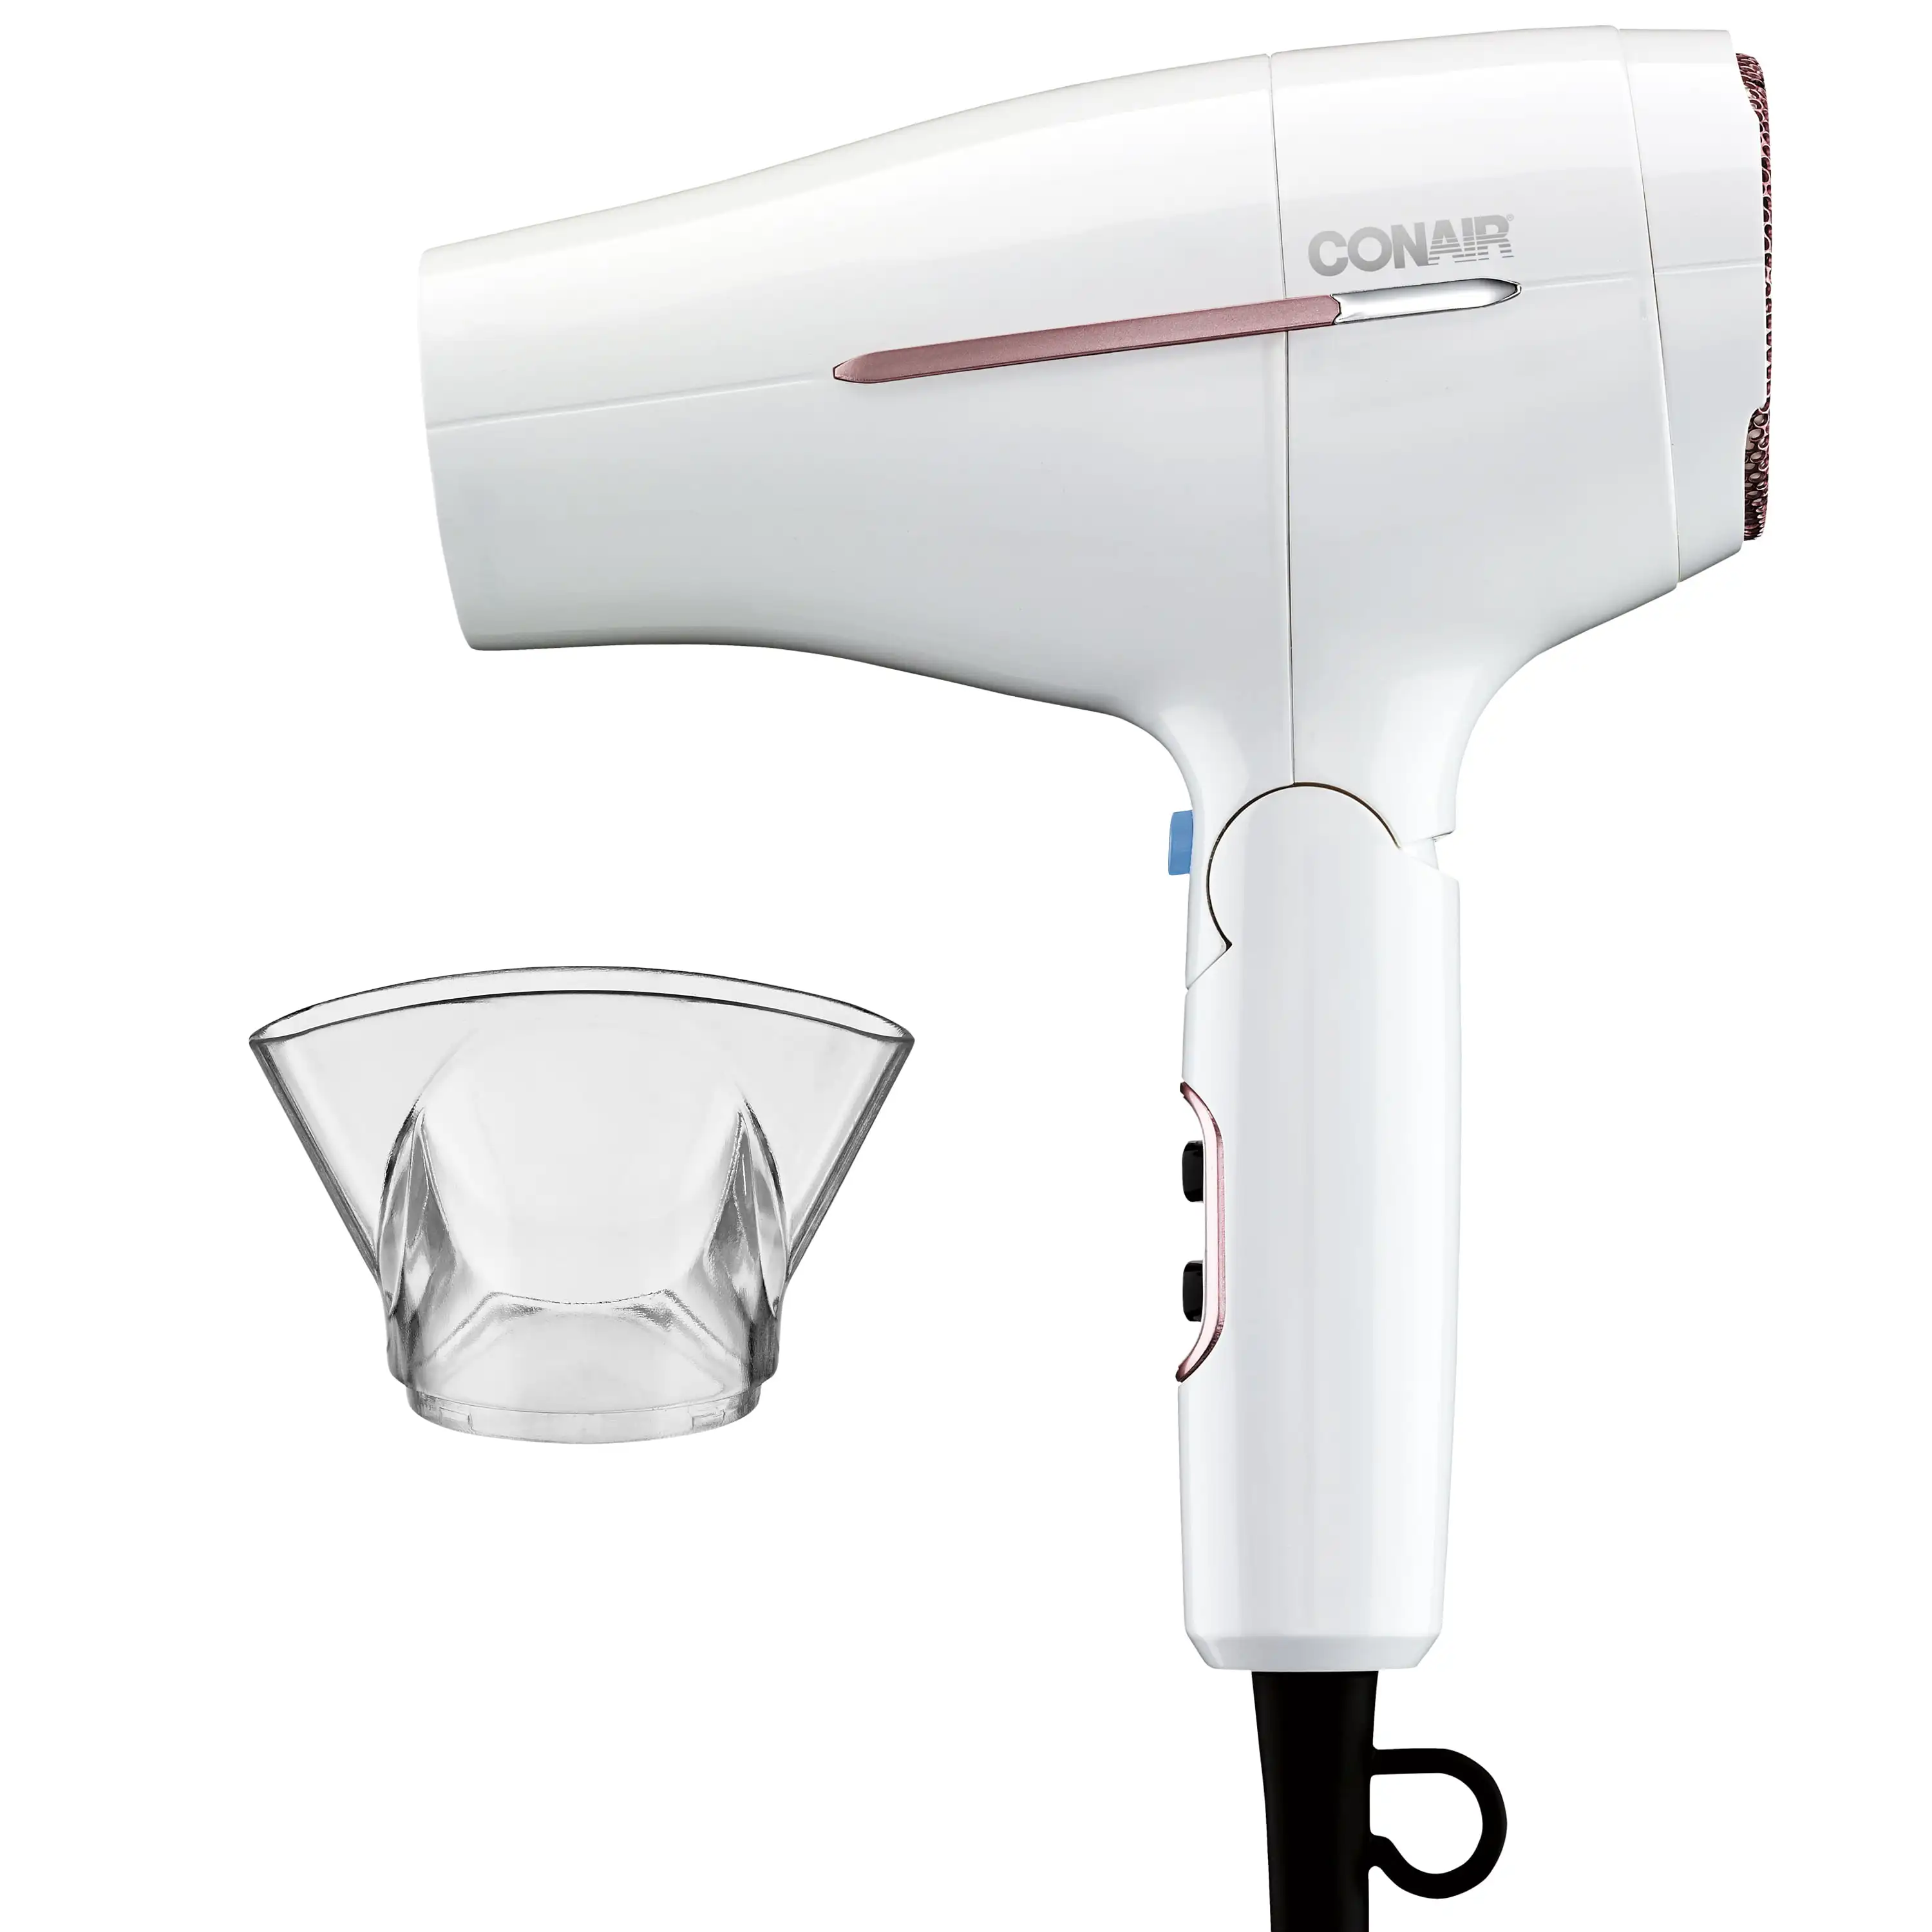 

1875 Watt Worldwide Travel Hair Dryer with Smart Voltage Technology and Folding Handle